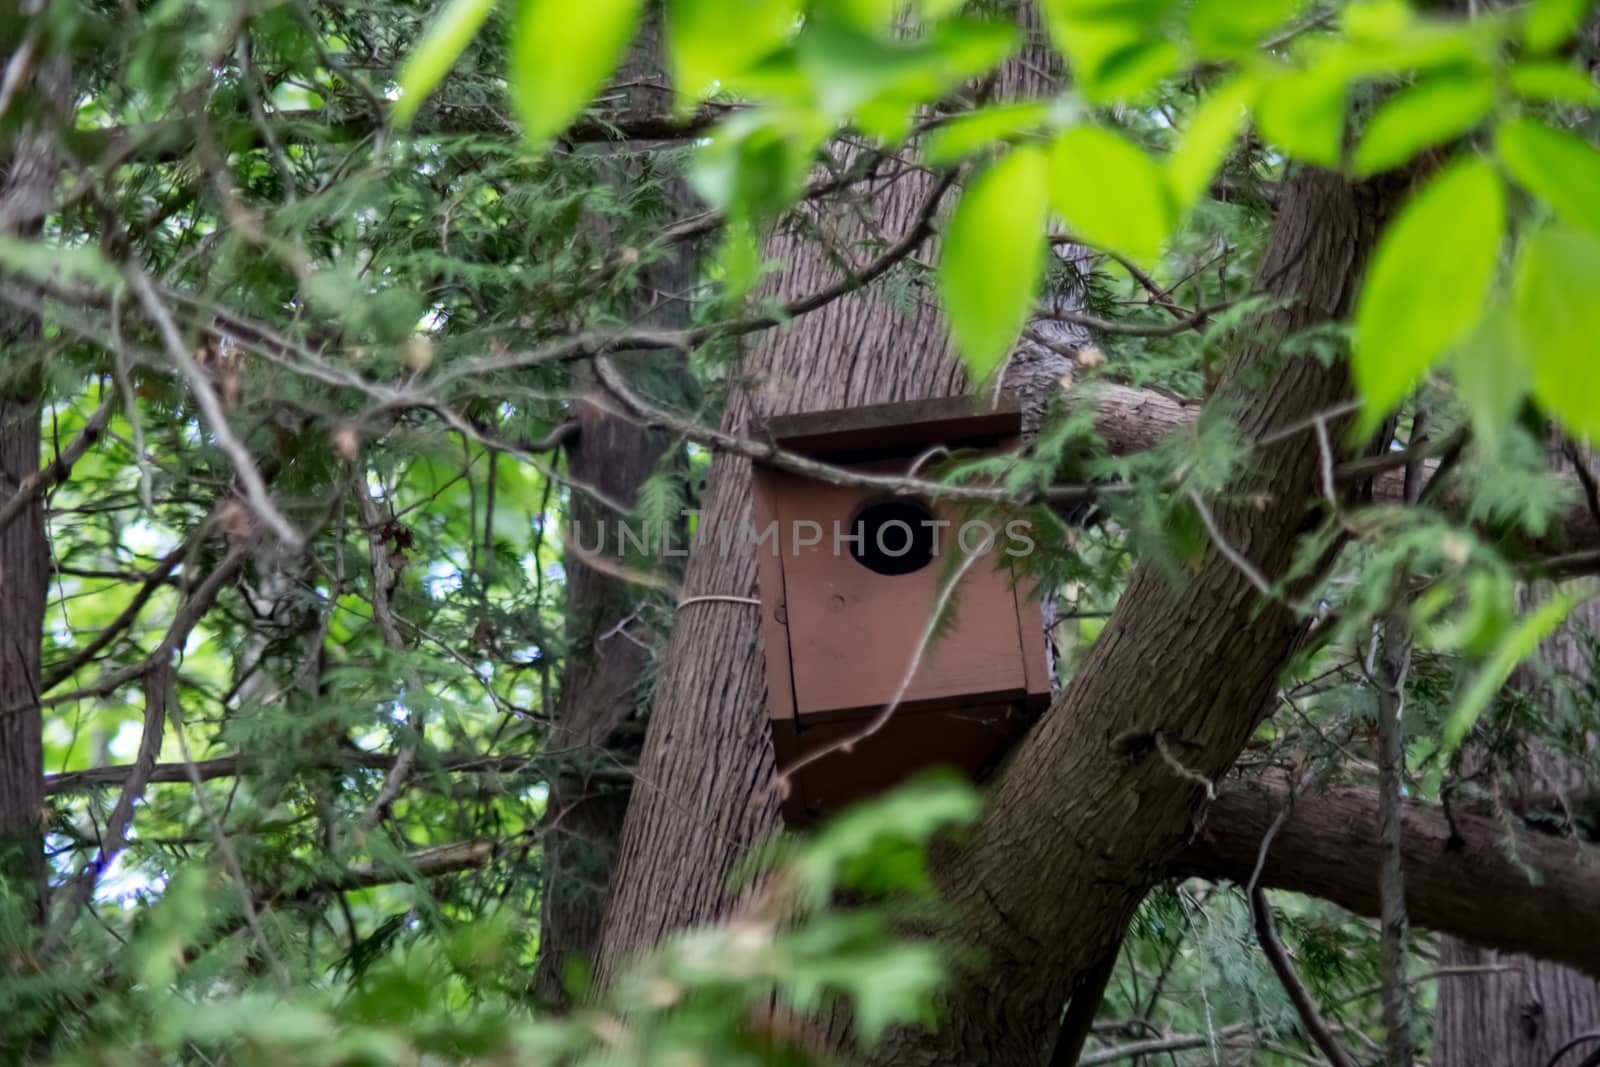 A wooden birdhouse is placed on the branch of a tree in the forest.